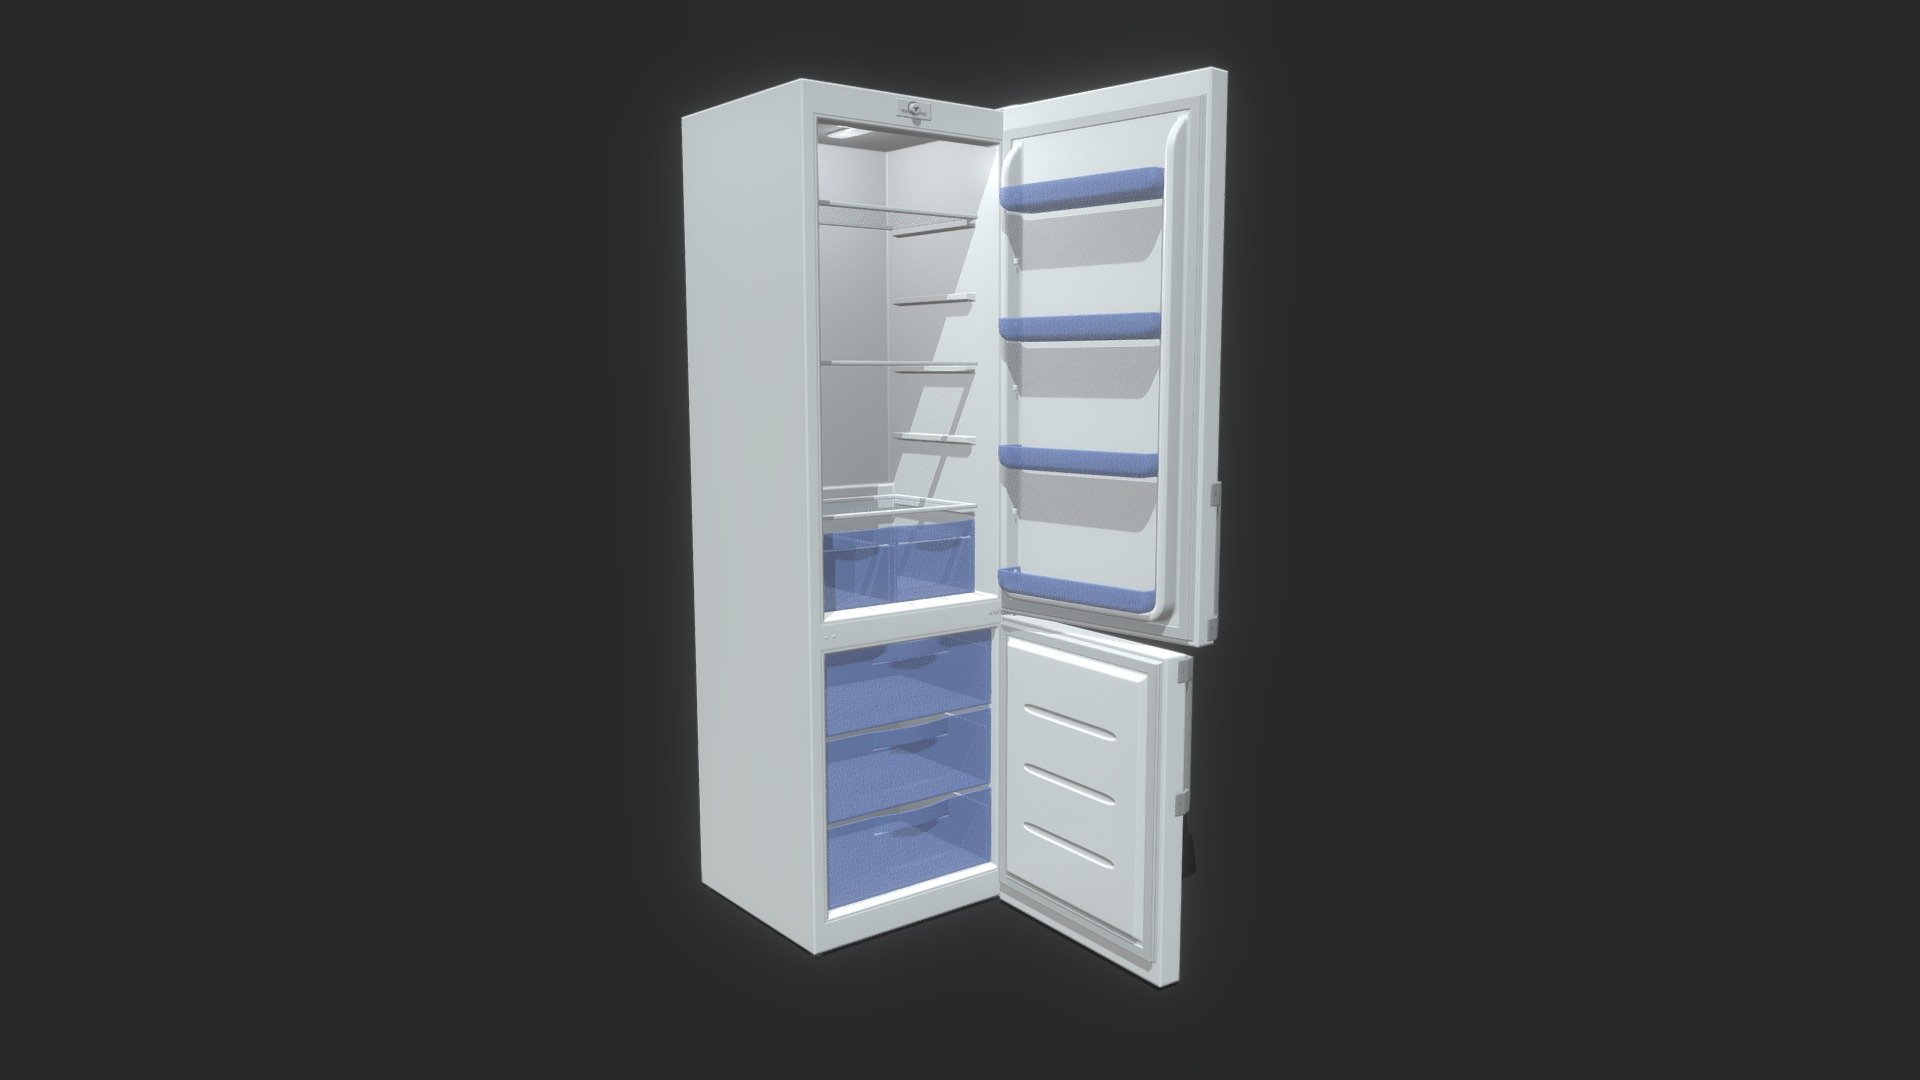 Game ready low-poly Refrigerator model with PBR textures for game engines/renderers. 4096x4096 PBR Metallic/Roughness textures.

This product is intended for game/real time/background use. This model is not intended for subdivision. Geometry is triangulated. Model unwrapped manually. All materials and objects named appropriately. Scaled to approximate real world size. Tested in Marmoset Toolbag 3. Tested in Unreal Engine 4. Tested in Unity. No special plugins needed. .obj and .fbx versions exported from Blender 2.82.

4096x4096 textures in png format included for 3 different colors:
- General PBR Metallic/Roughness  textures: BaseColor, Metallic, Roughness, Normal(DirectX), Normal(OpenGL), AO, Emission;
- Unity Textures: Albedo, MetallicSmoothness, Normal, AO, Emission;
- Unreal Engine 4 textures: BaseColor, OcclusionRoughnessMetallic, Normal, Emission;
- PBR Specular/Glossiness textures: Diffuse, Specular, Glossiness, Normal(DirectX), Normal(OpenGL), AO, Emission.
 - Refrigerator - Buy Royalty Free 3D model by AshMesh 3d model